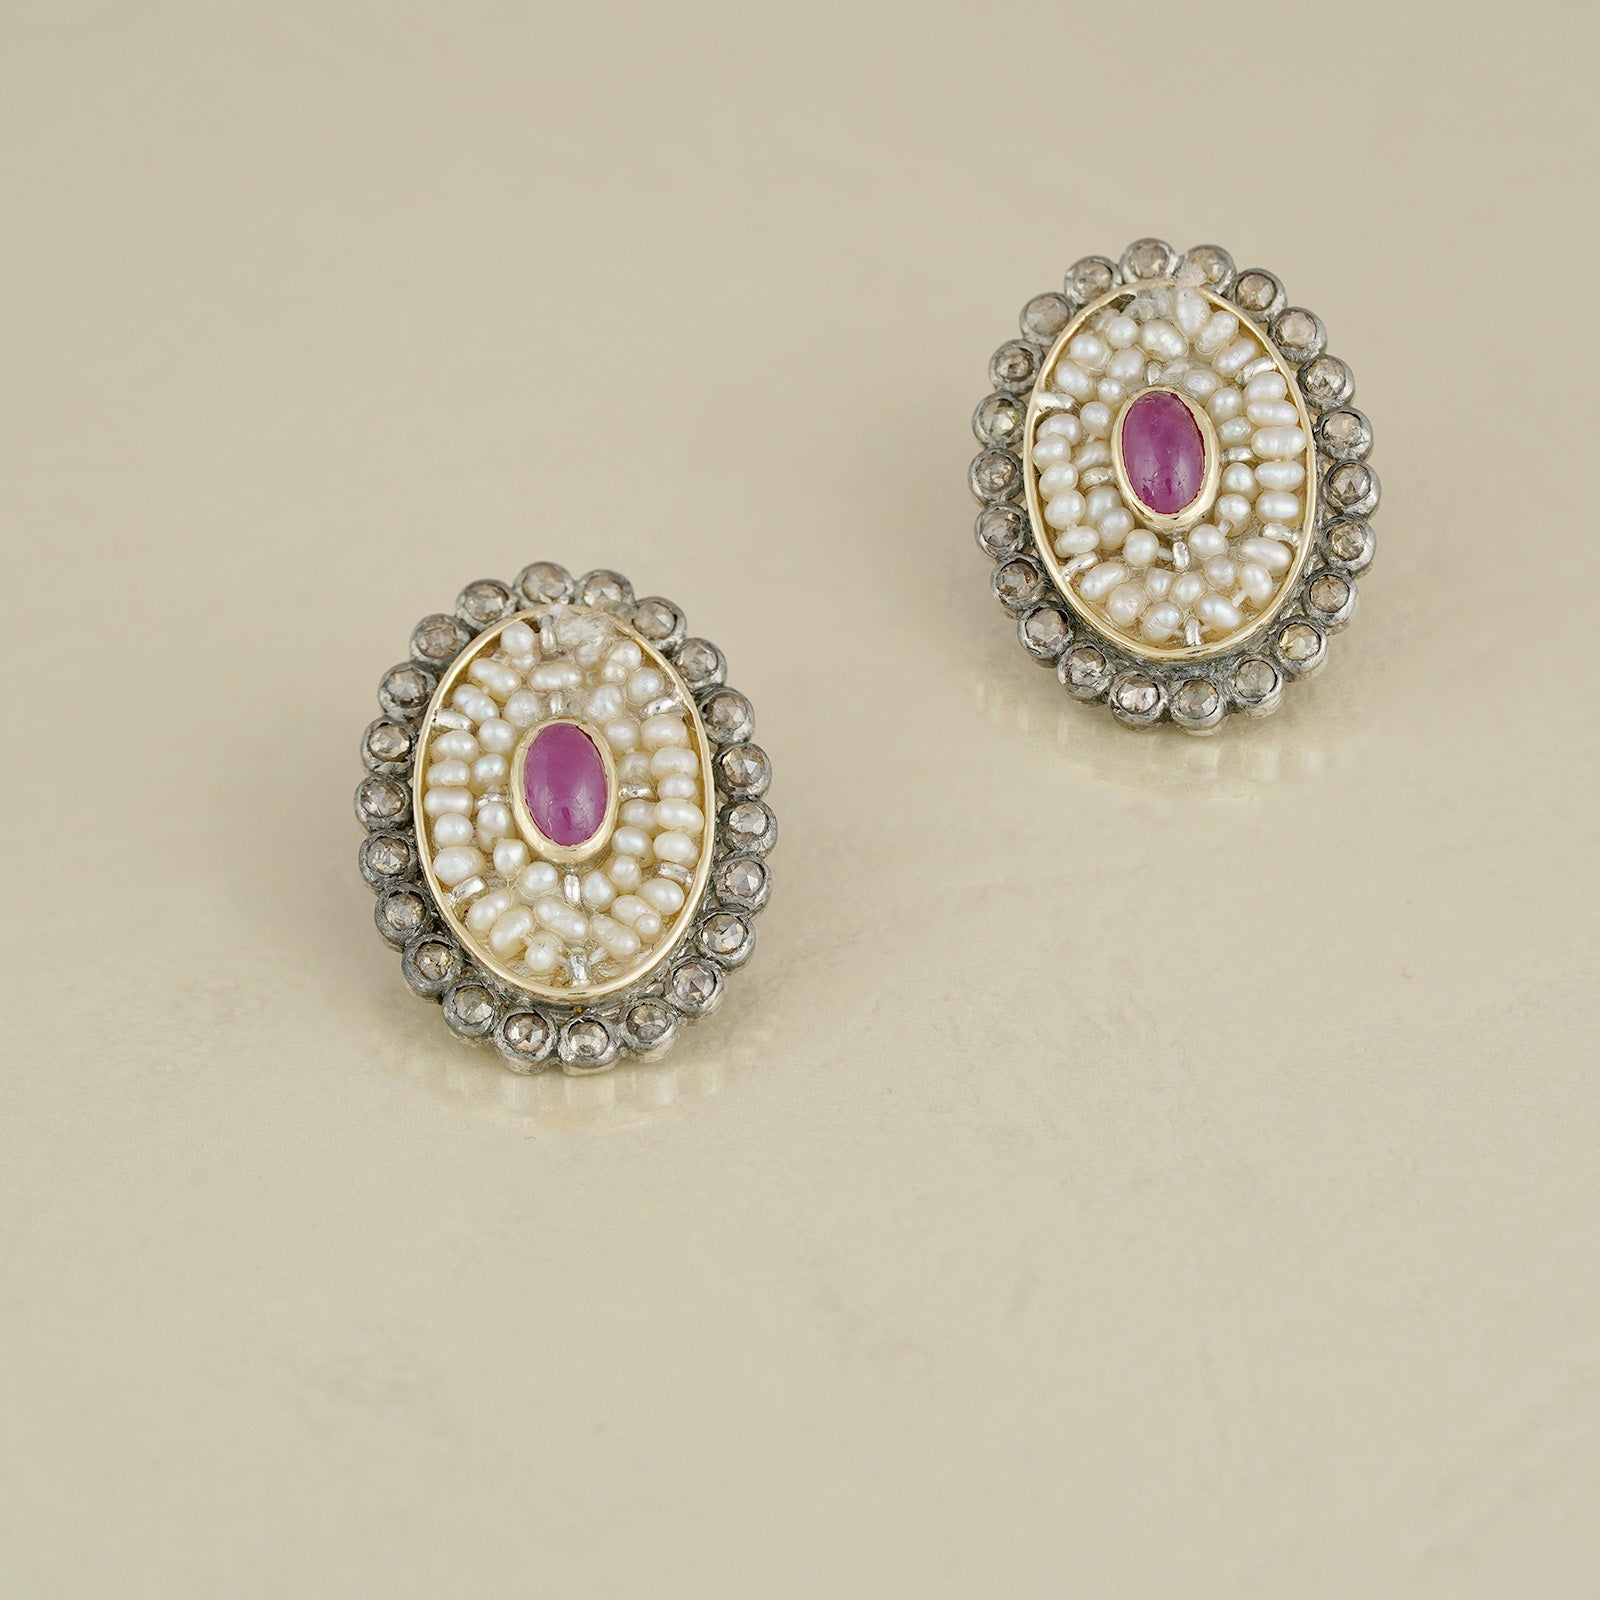 Ruby and Pearl Statement Cufflinks